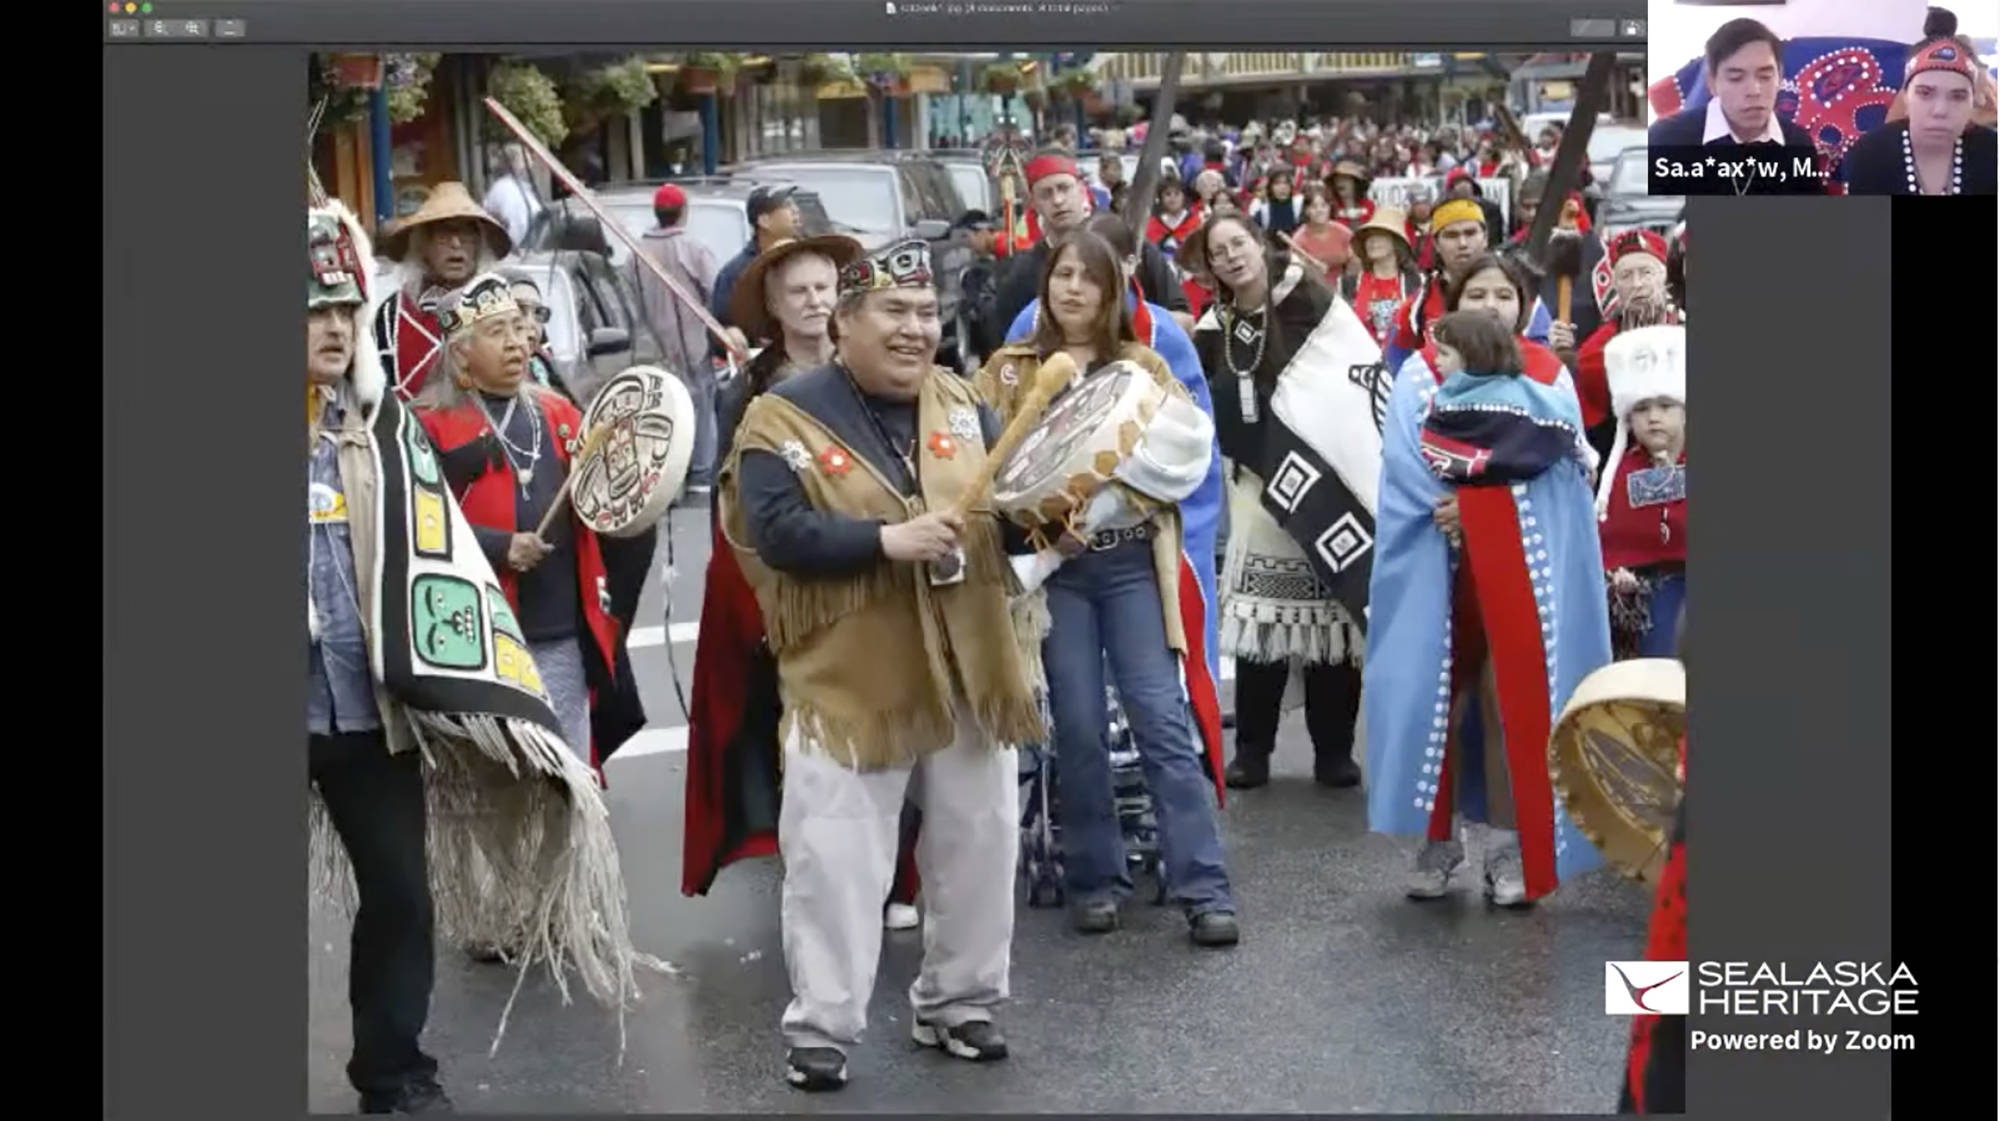 This Nov. 5, 2020, photo provided by the Sealaska Heritage Institute shows a Zoom memorial service for Tlingit elder David Katzeek, conducted by the Institute, showing highlights of Katzeek’s life as people honored him over the internet as the pandemic had made in-person ceremonies impossible. (Sealaska Heritage Institute)